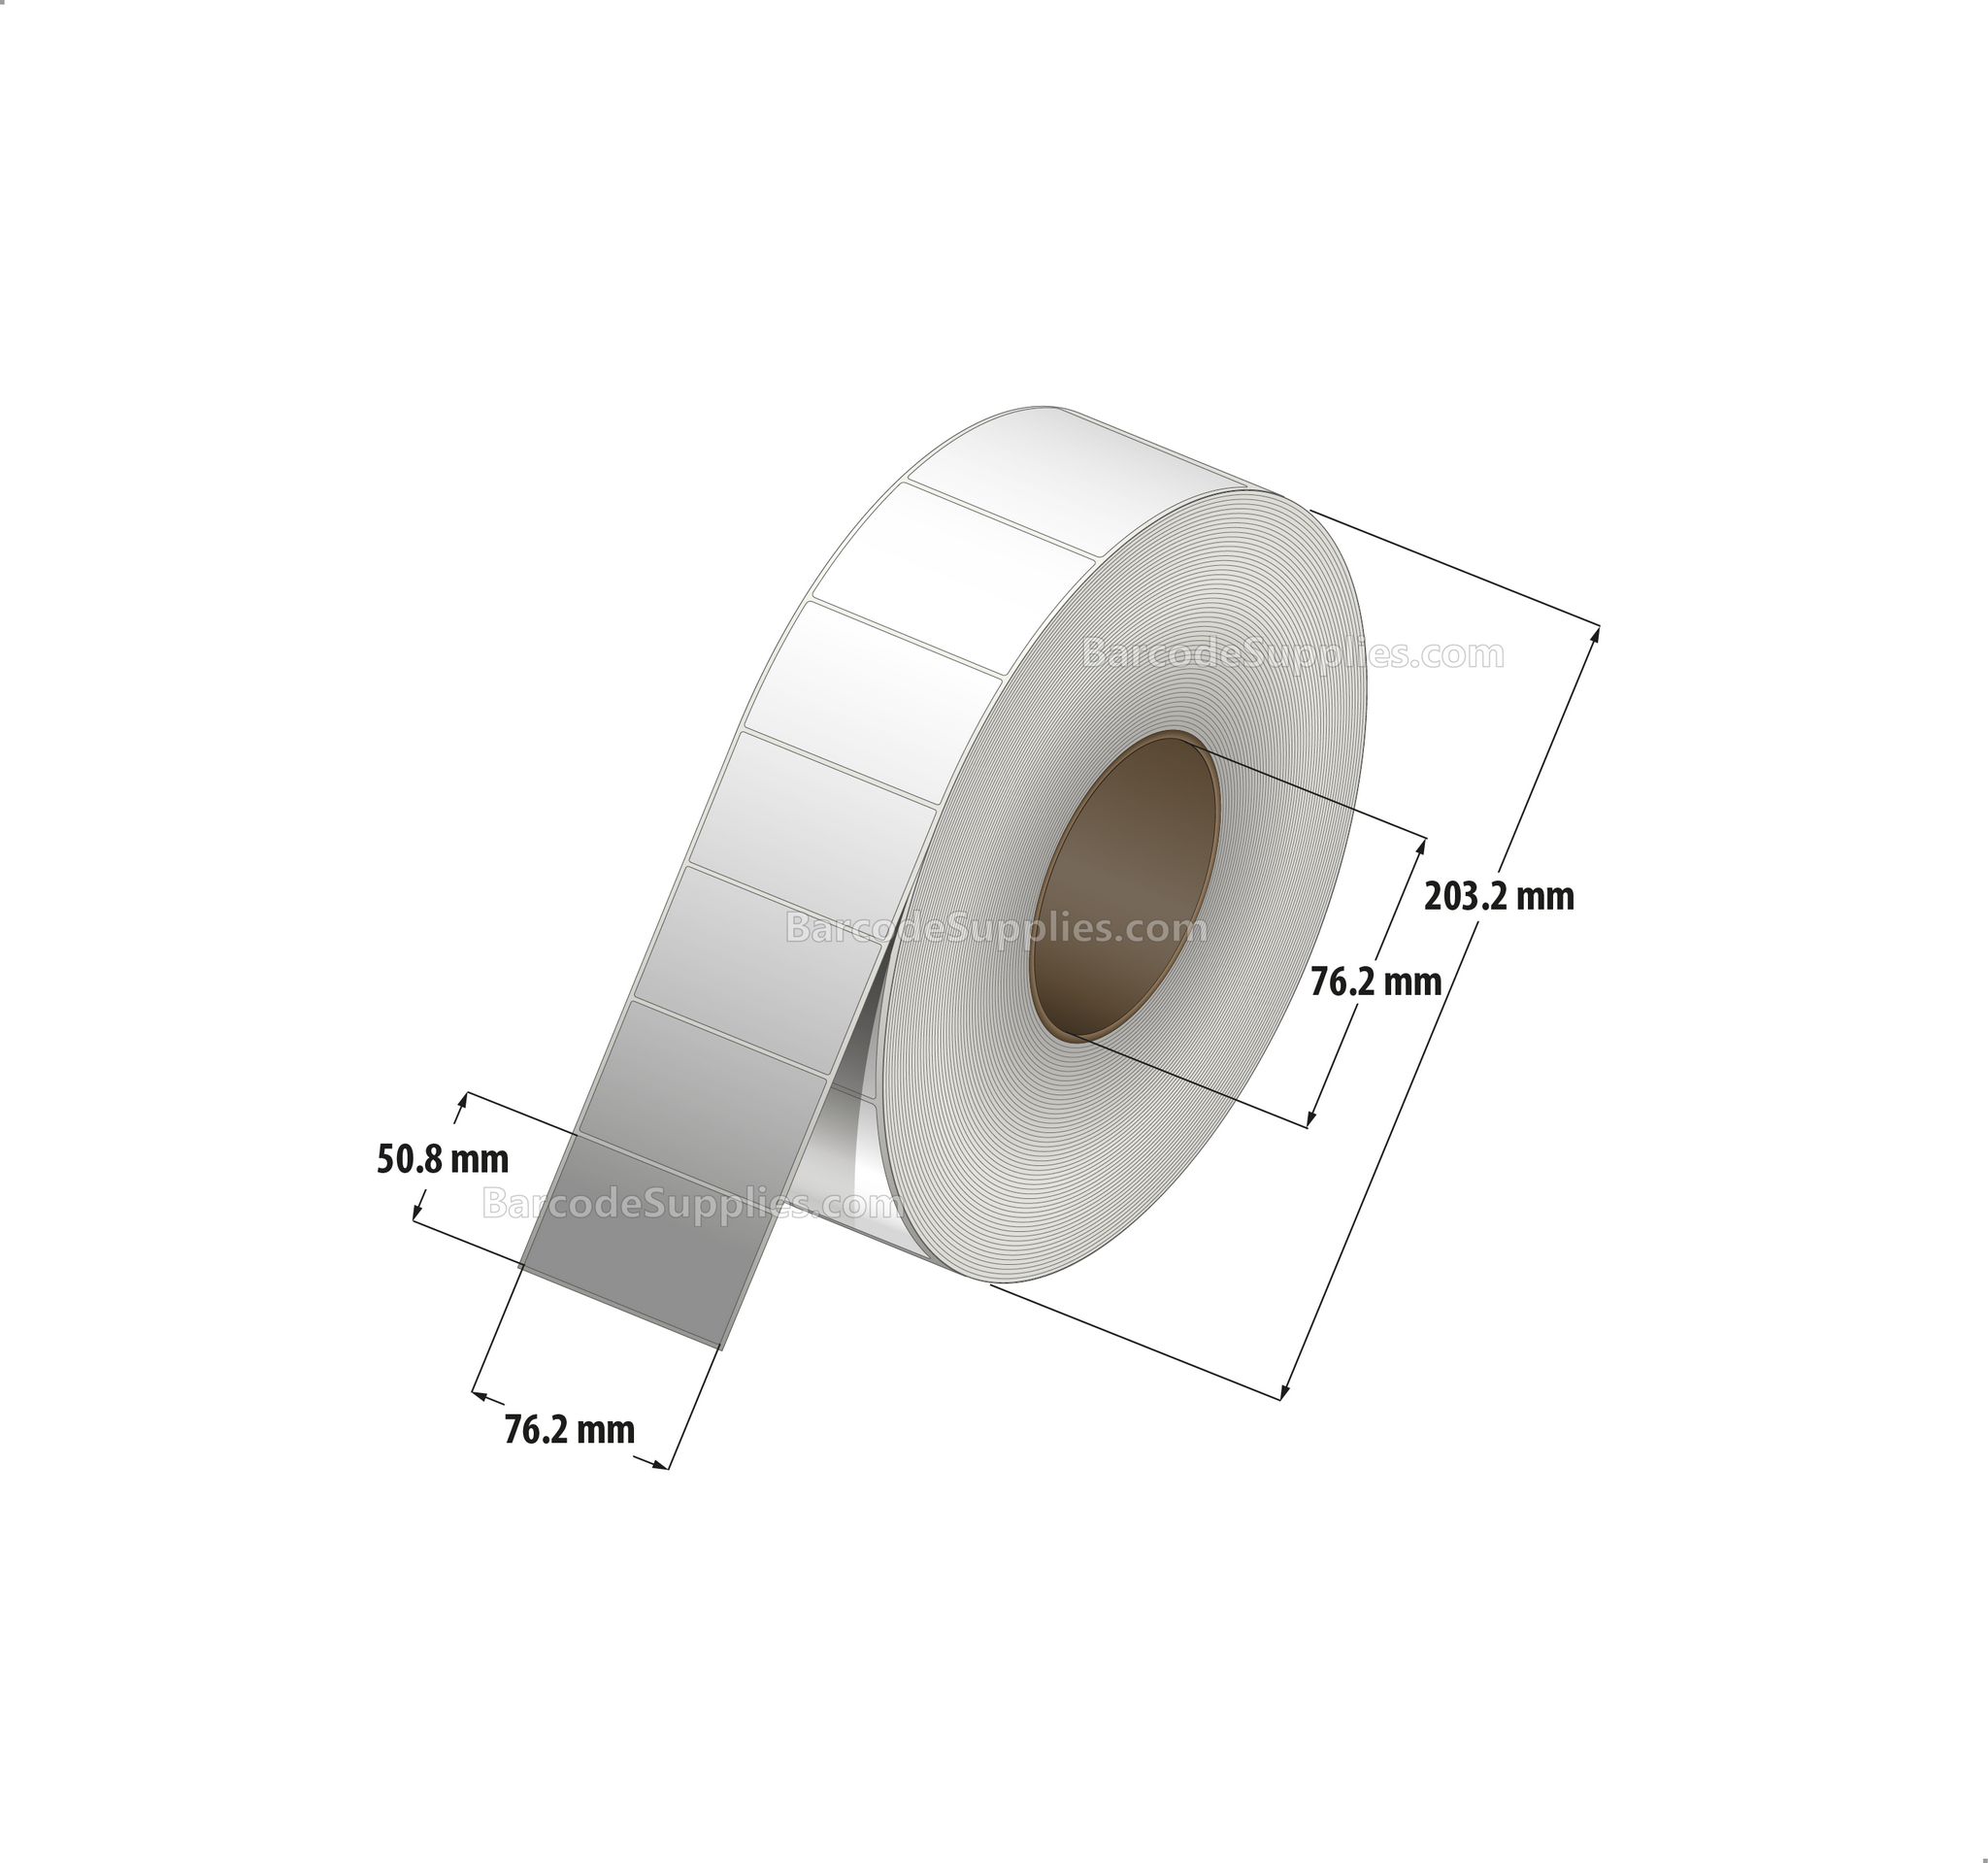 3 x 2 Thermal Transfer White Labels With Rubber Adhesive - No Perforation - 3000 Labels Per Roll - Carton Of 6 Rolls - 18000 Labels Total - MPN: CTT300200-3